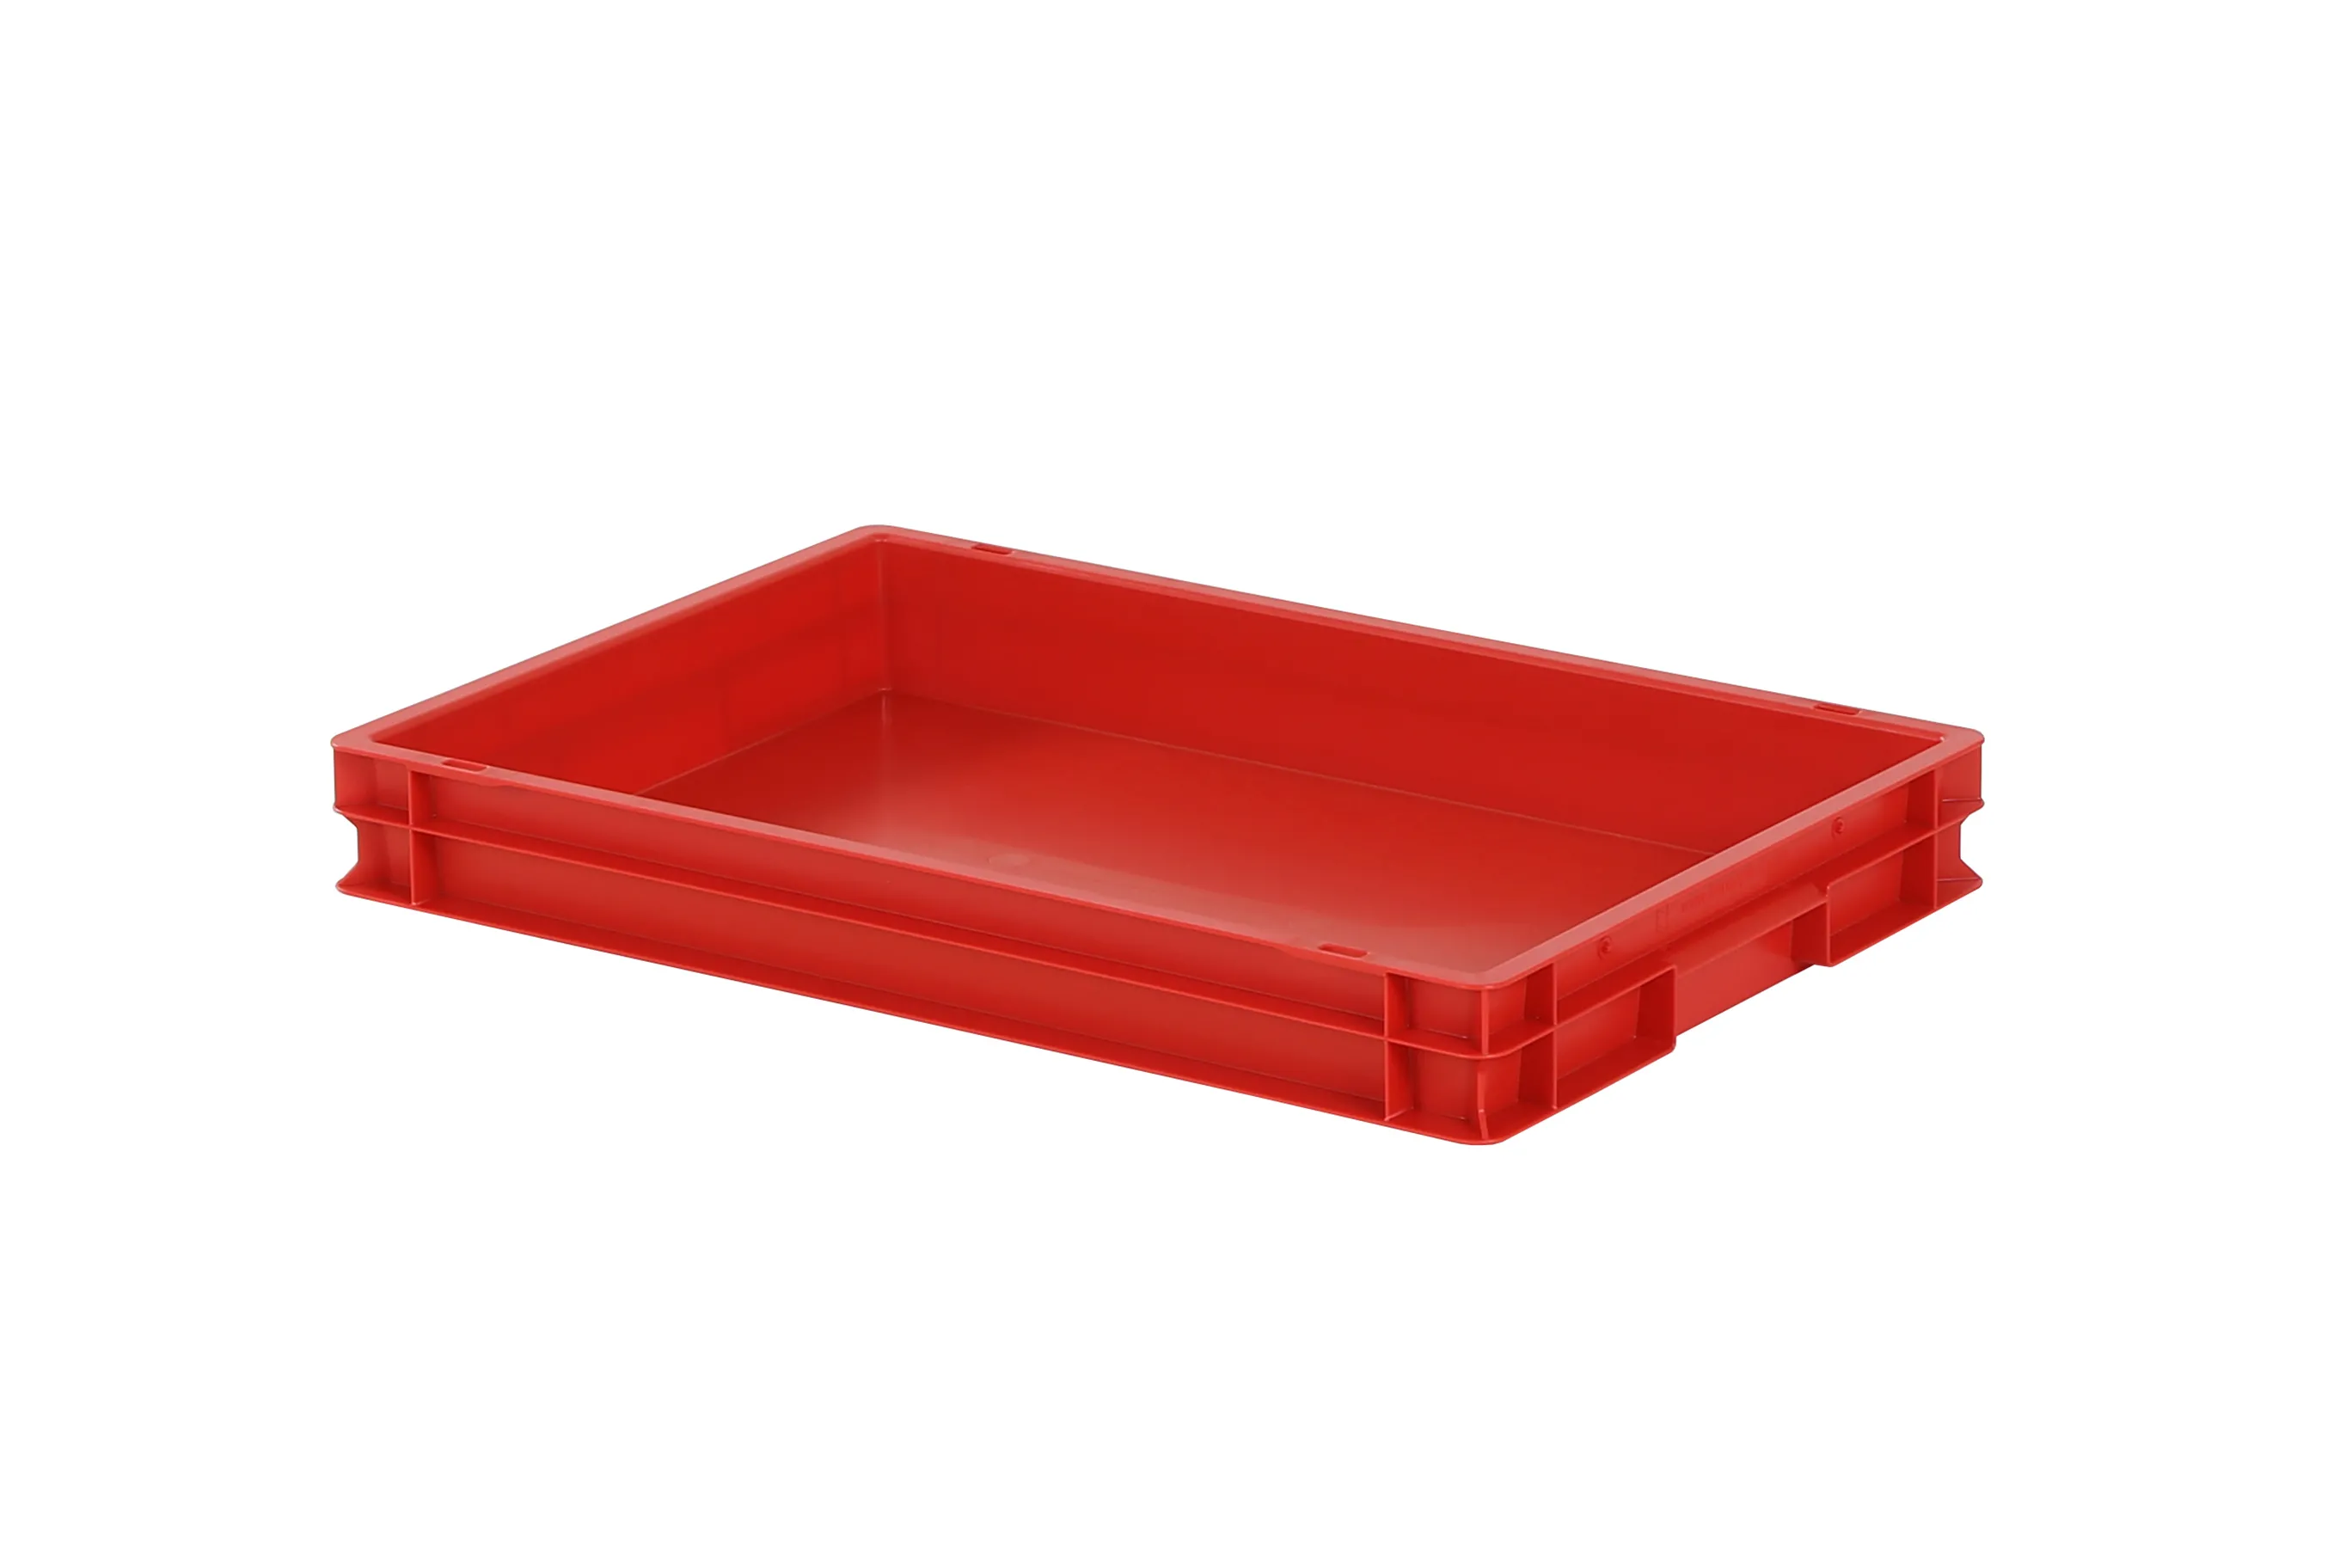 Stacking bin / drip tray - 600 x 400 x H 75 mm - red (smooth base)